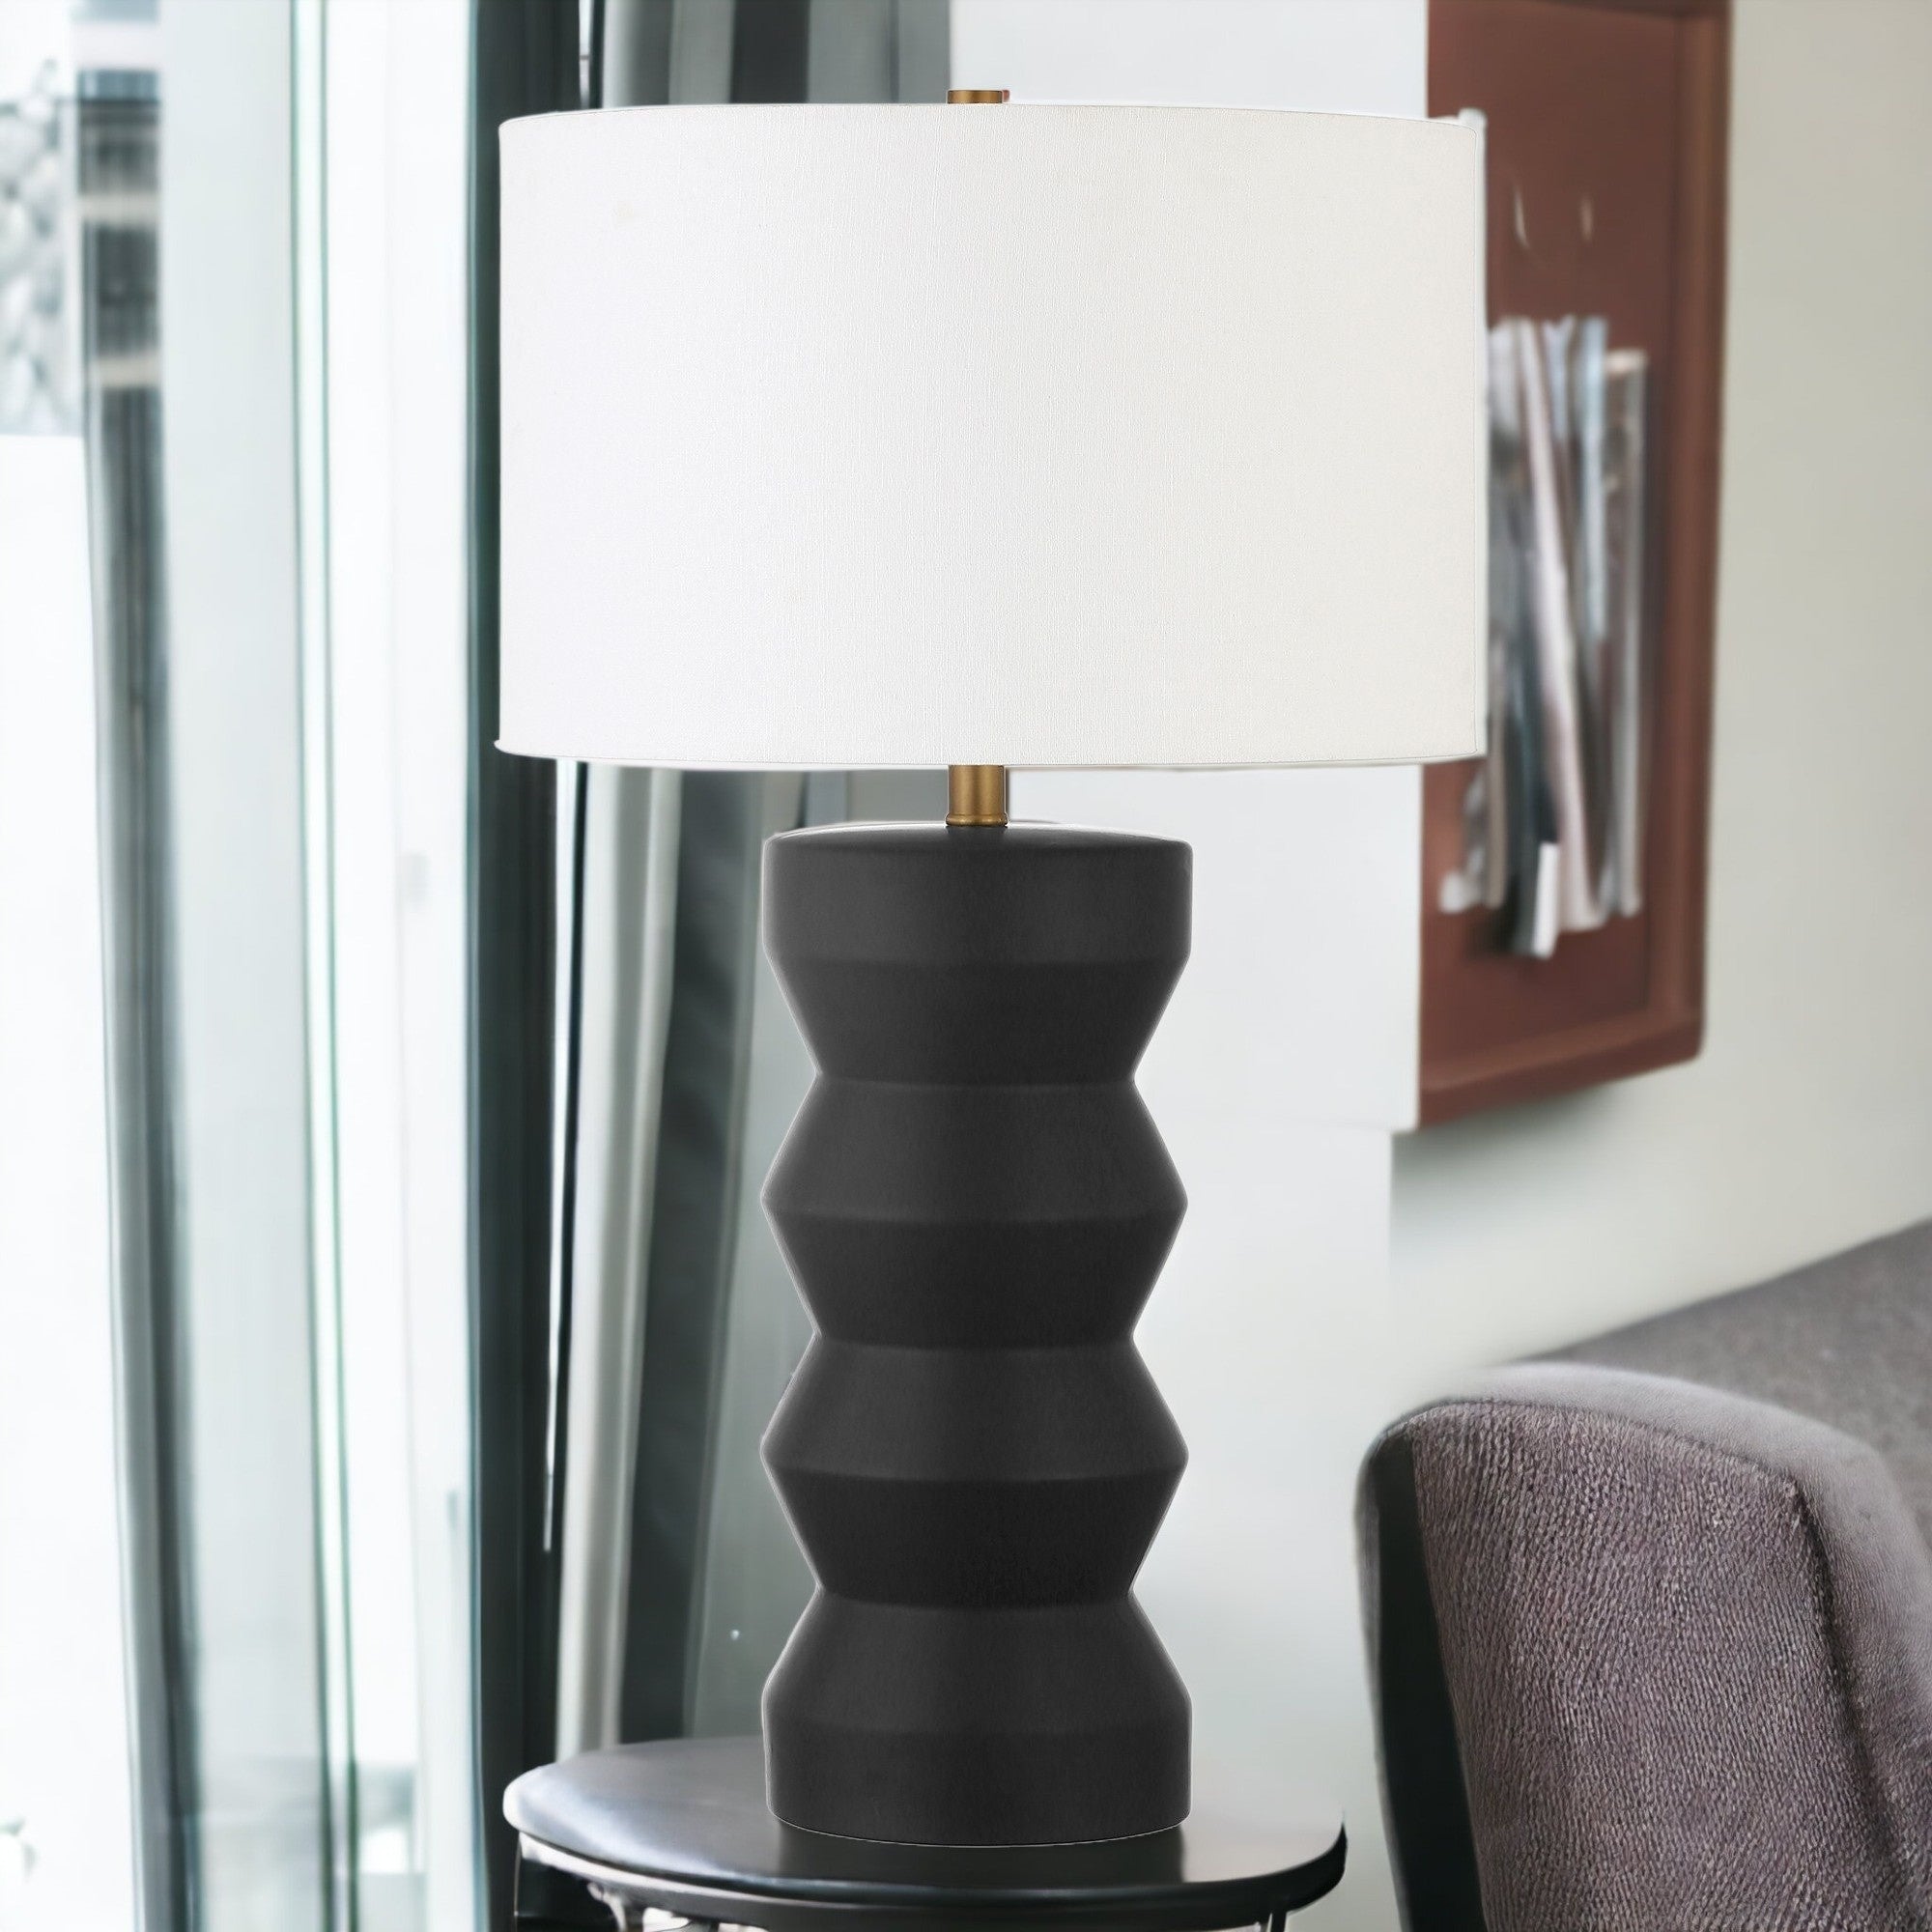 28" Black Ceramic Table Lamp With White Drum Shade